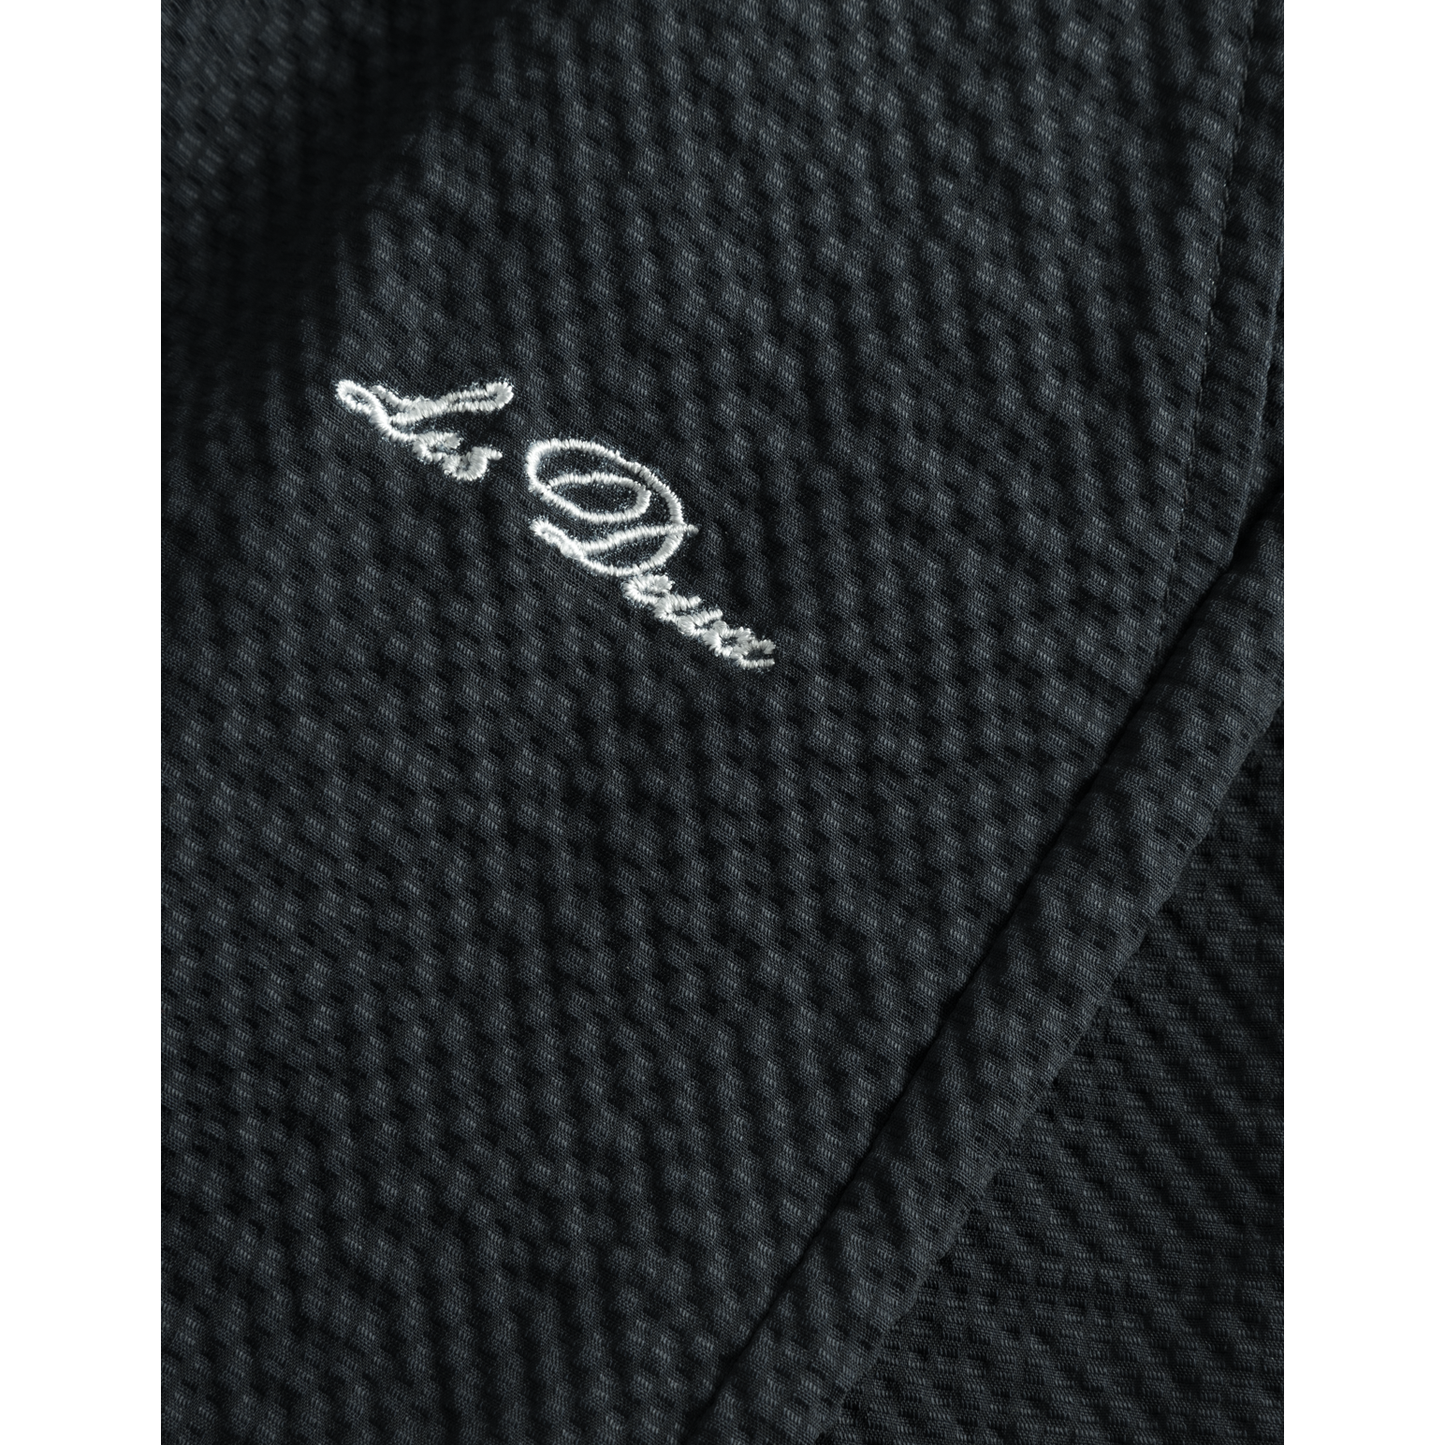 Close-up of a dark, quick-dry Stan Seersucker Swim Shorts 2.0 in Dark Navy with a "la dolce" embroidered inscription in white thread by Les Deux.